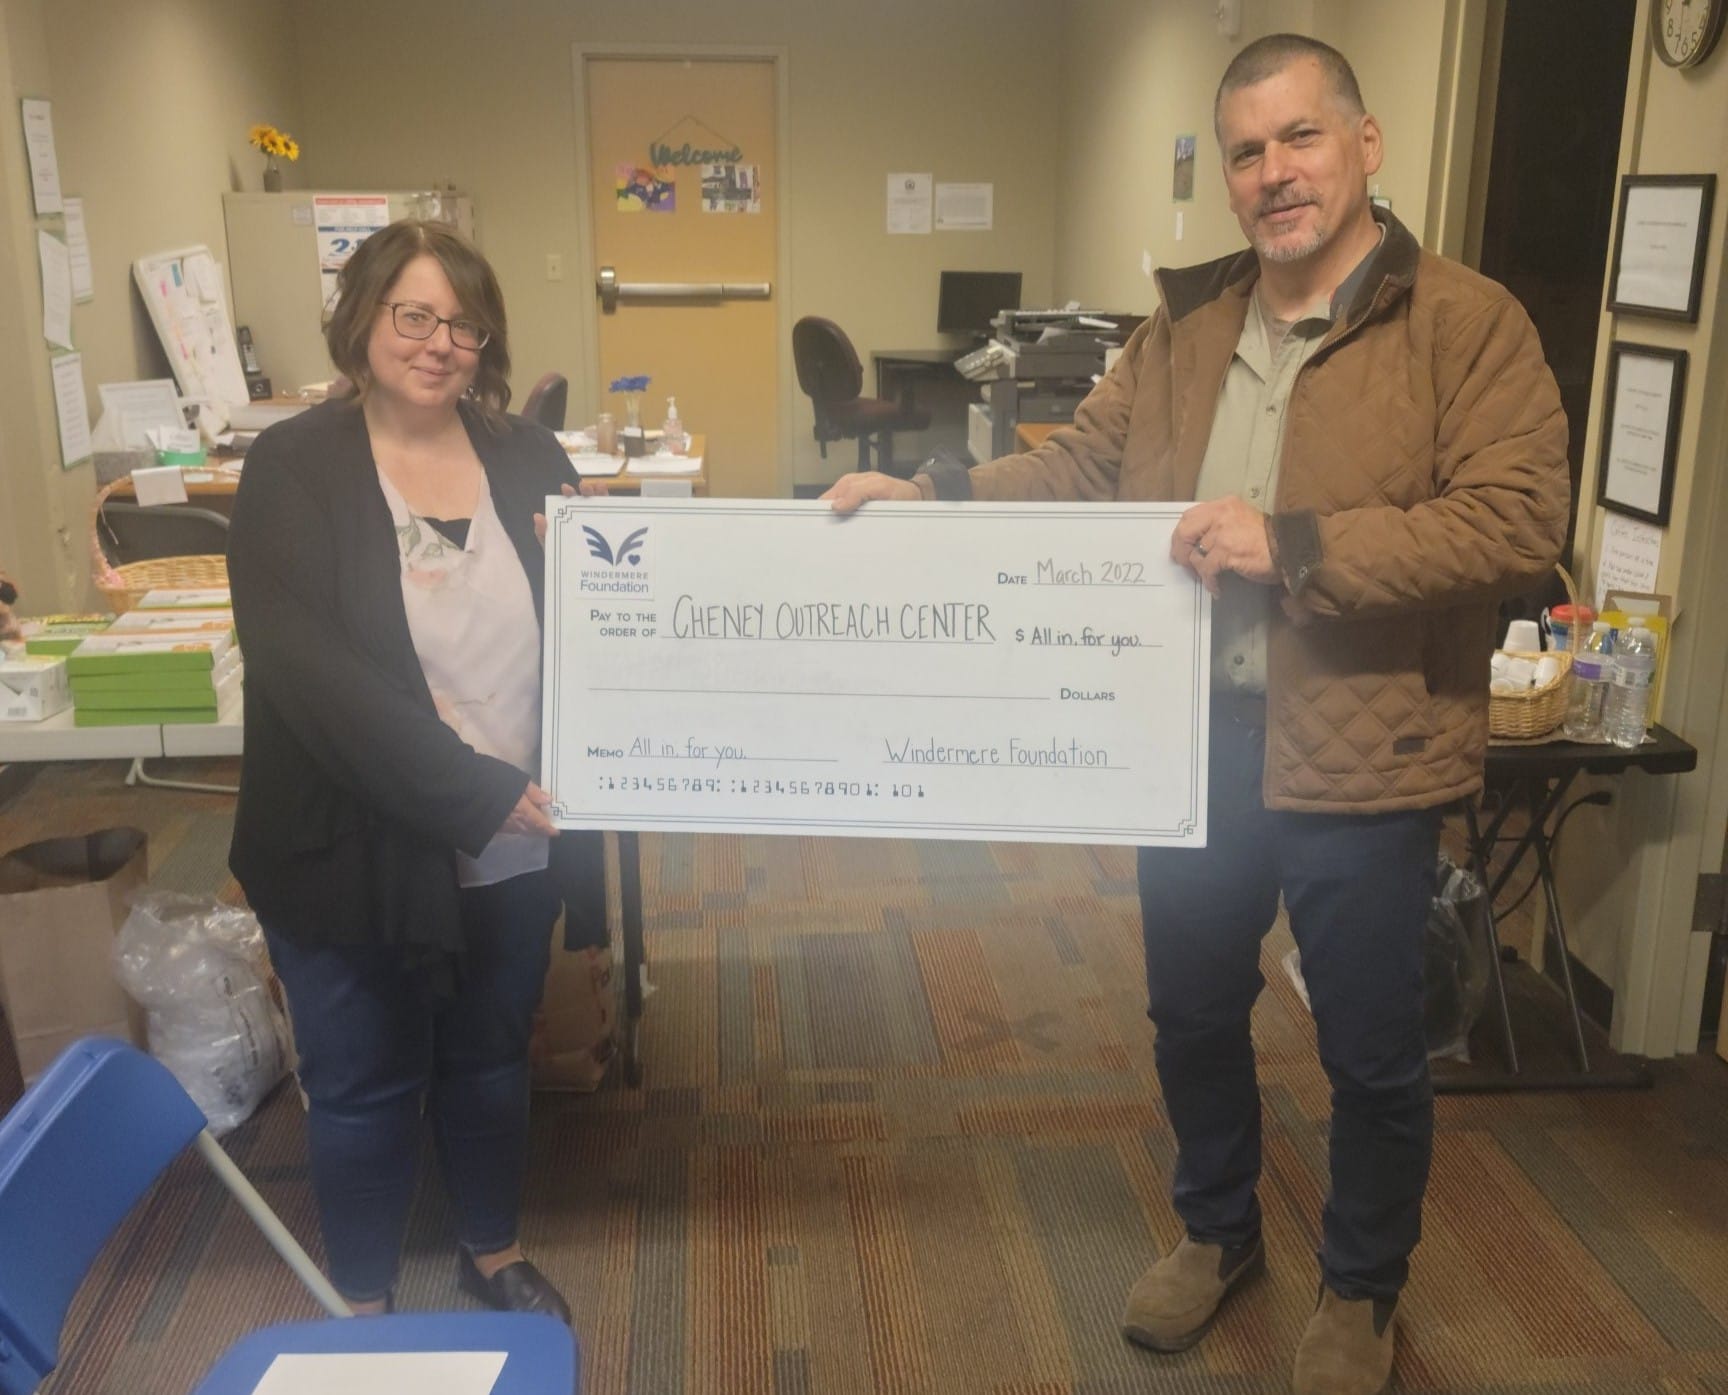 Cheney-Outreach-Center organization with lifesize donation check